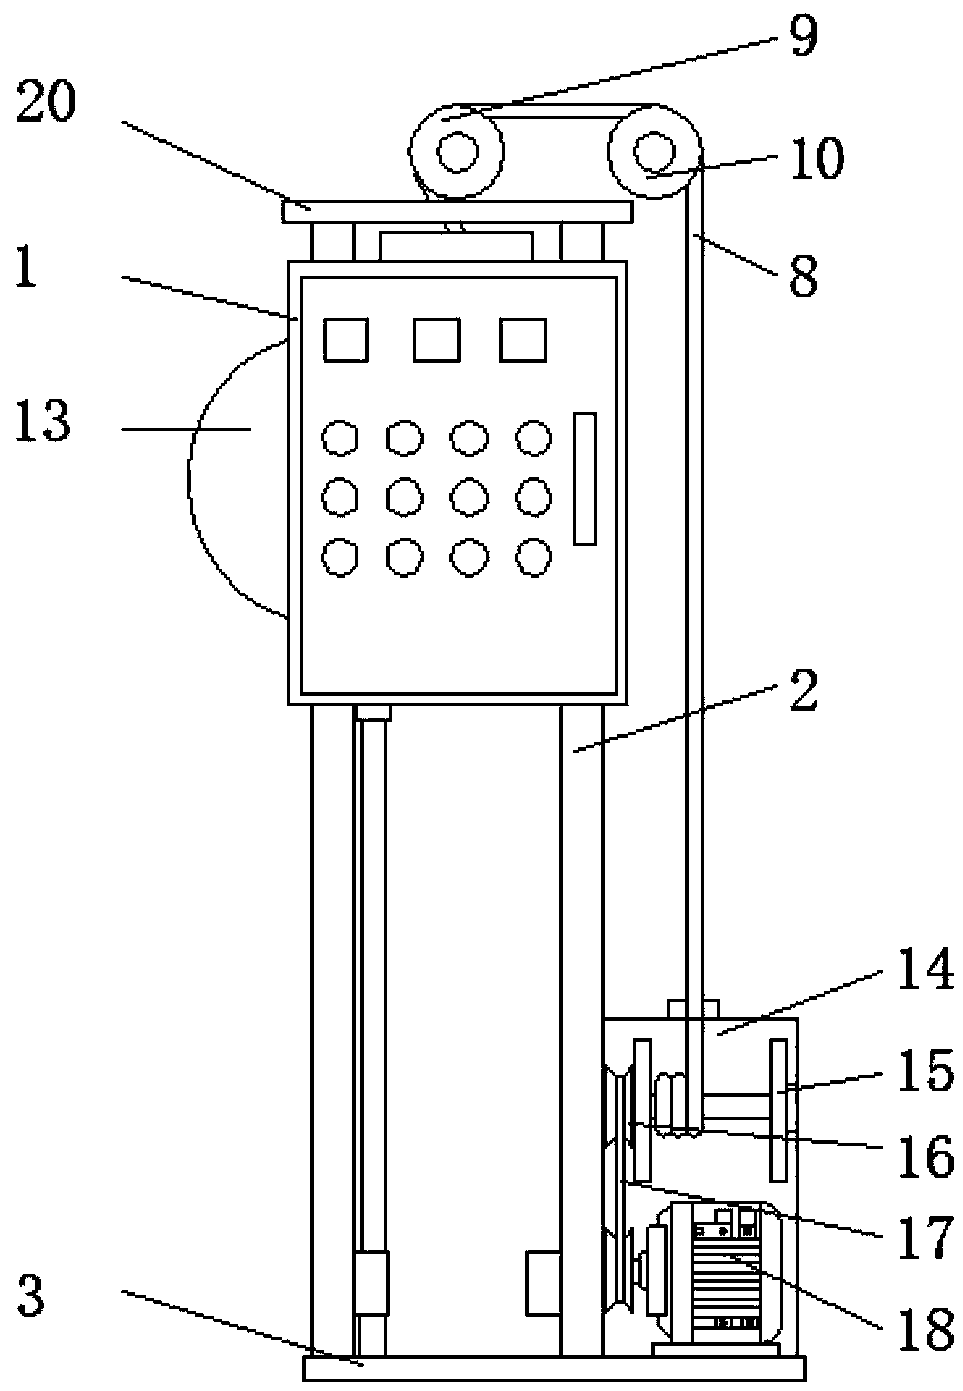 Novel mobile wall-mounted frequency converter case